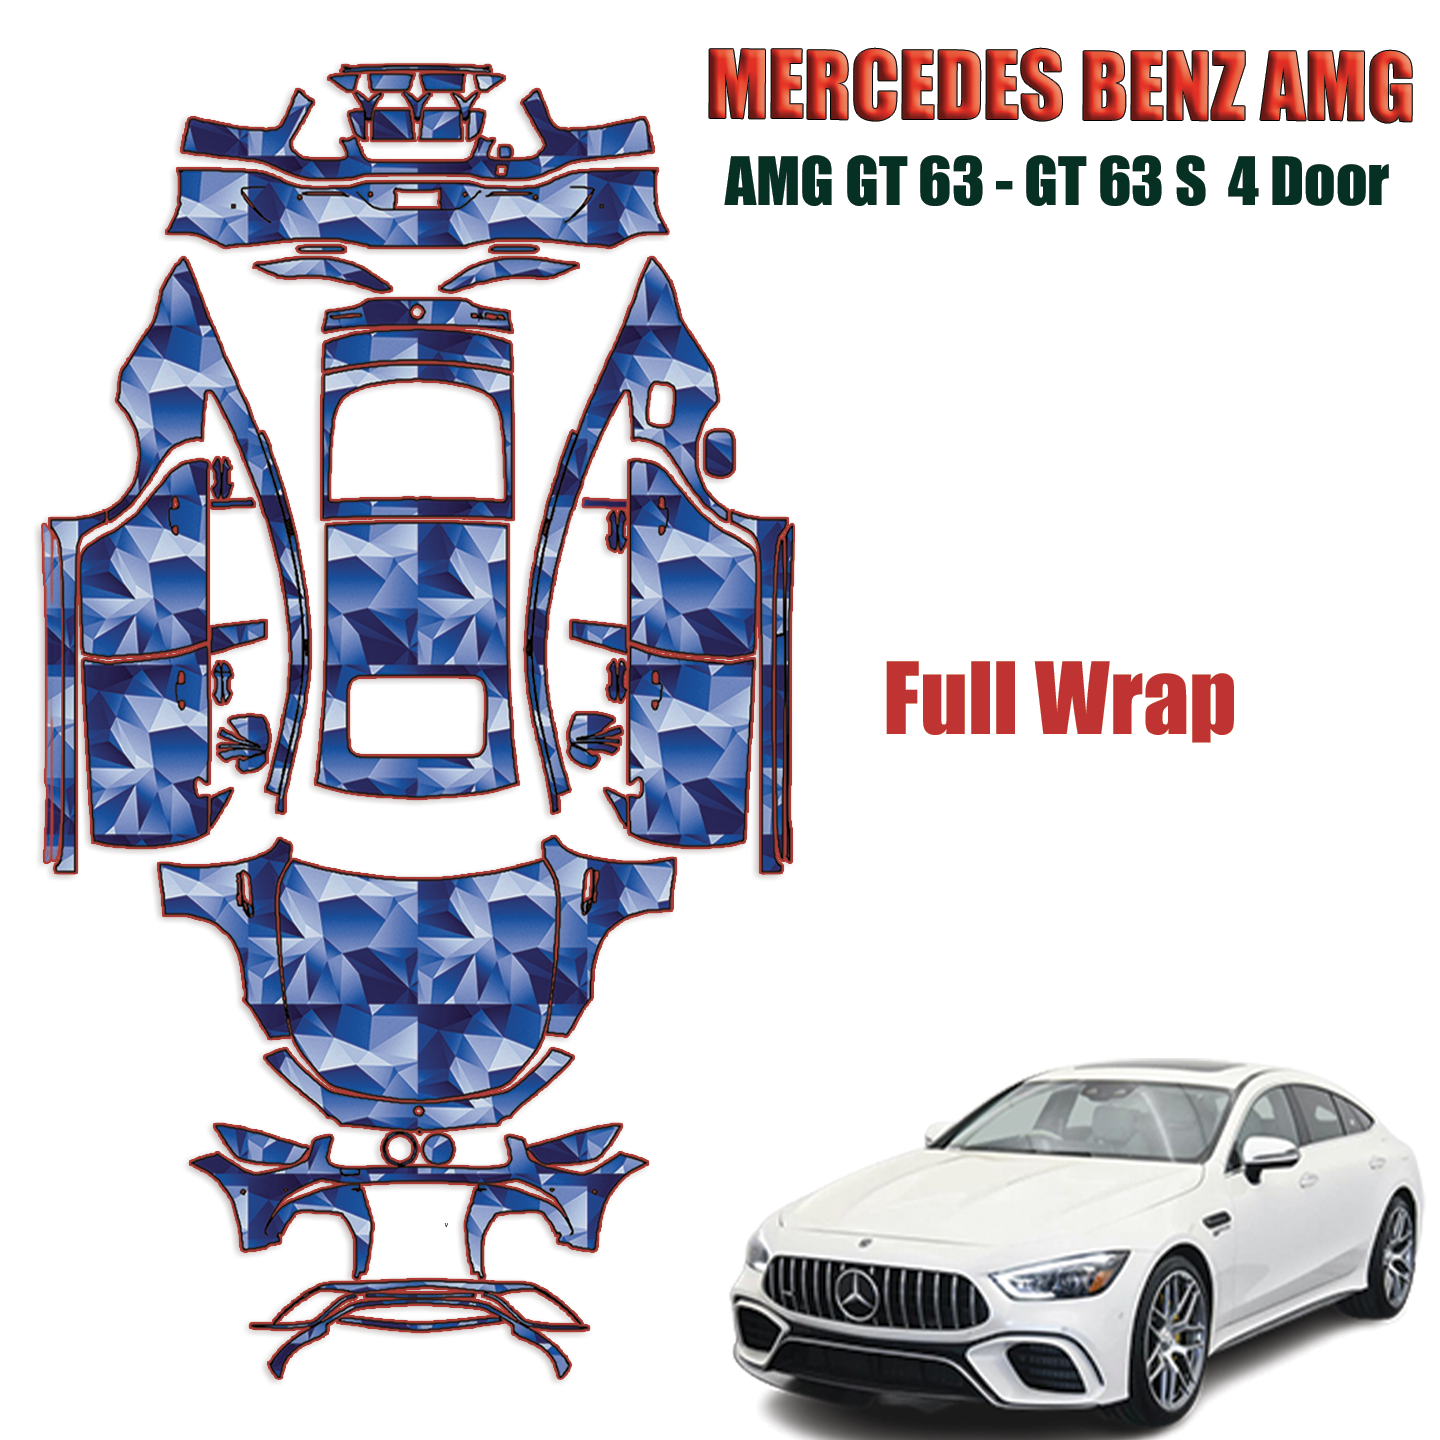  2019-2023 Mercedes-Benz AMG GT63, GT63S 4 Door Coupe Precut Paint Protection Kit – Full Wrap Vehicle